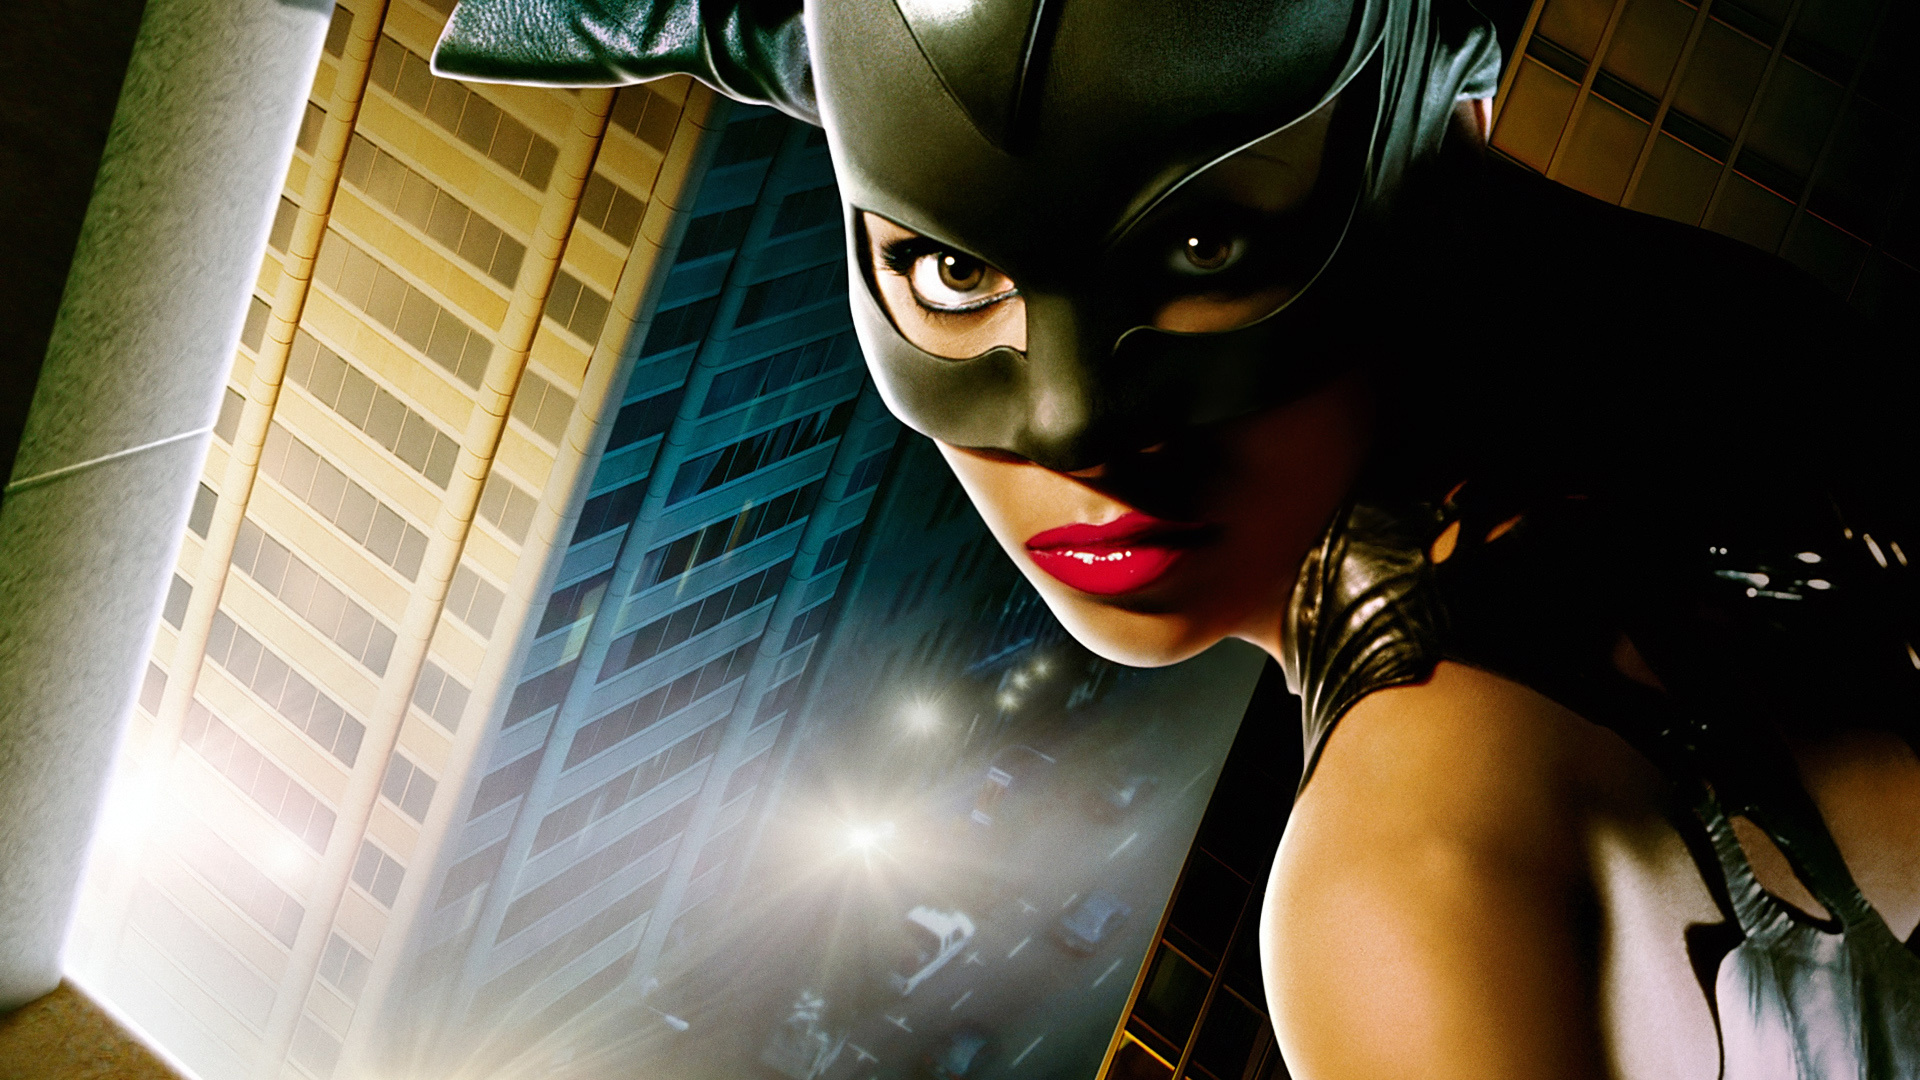 Catwoman (Movie), HD wallpaper, Movie poster, Captivating imagery, 1920x1080 Full HD Desktop